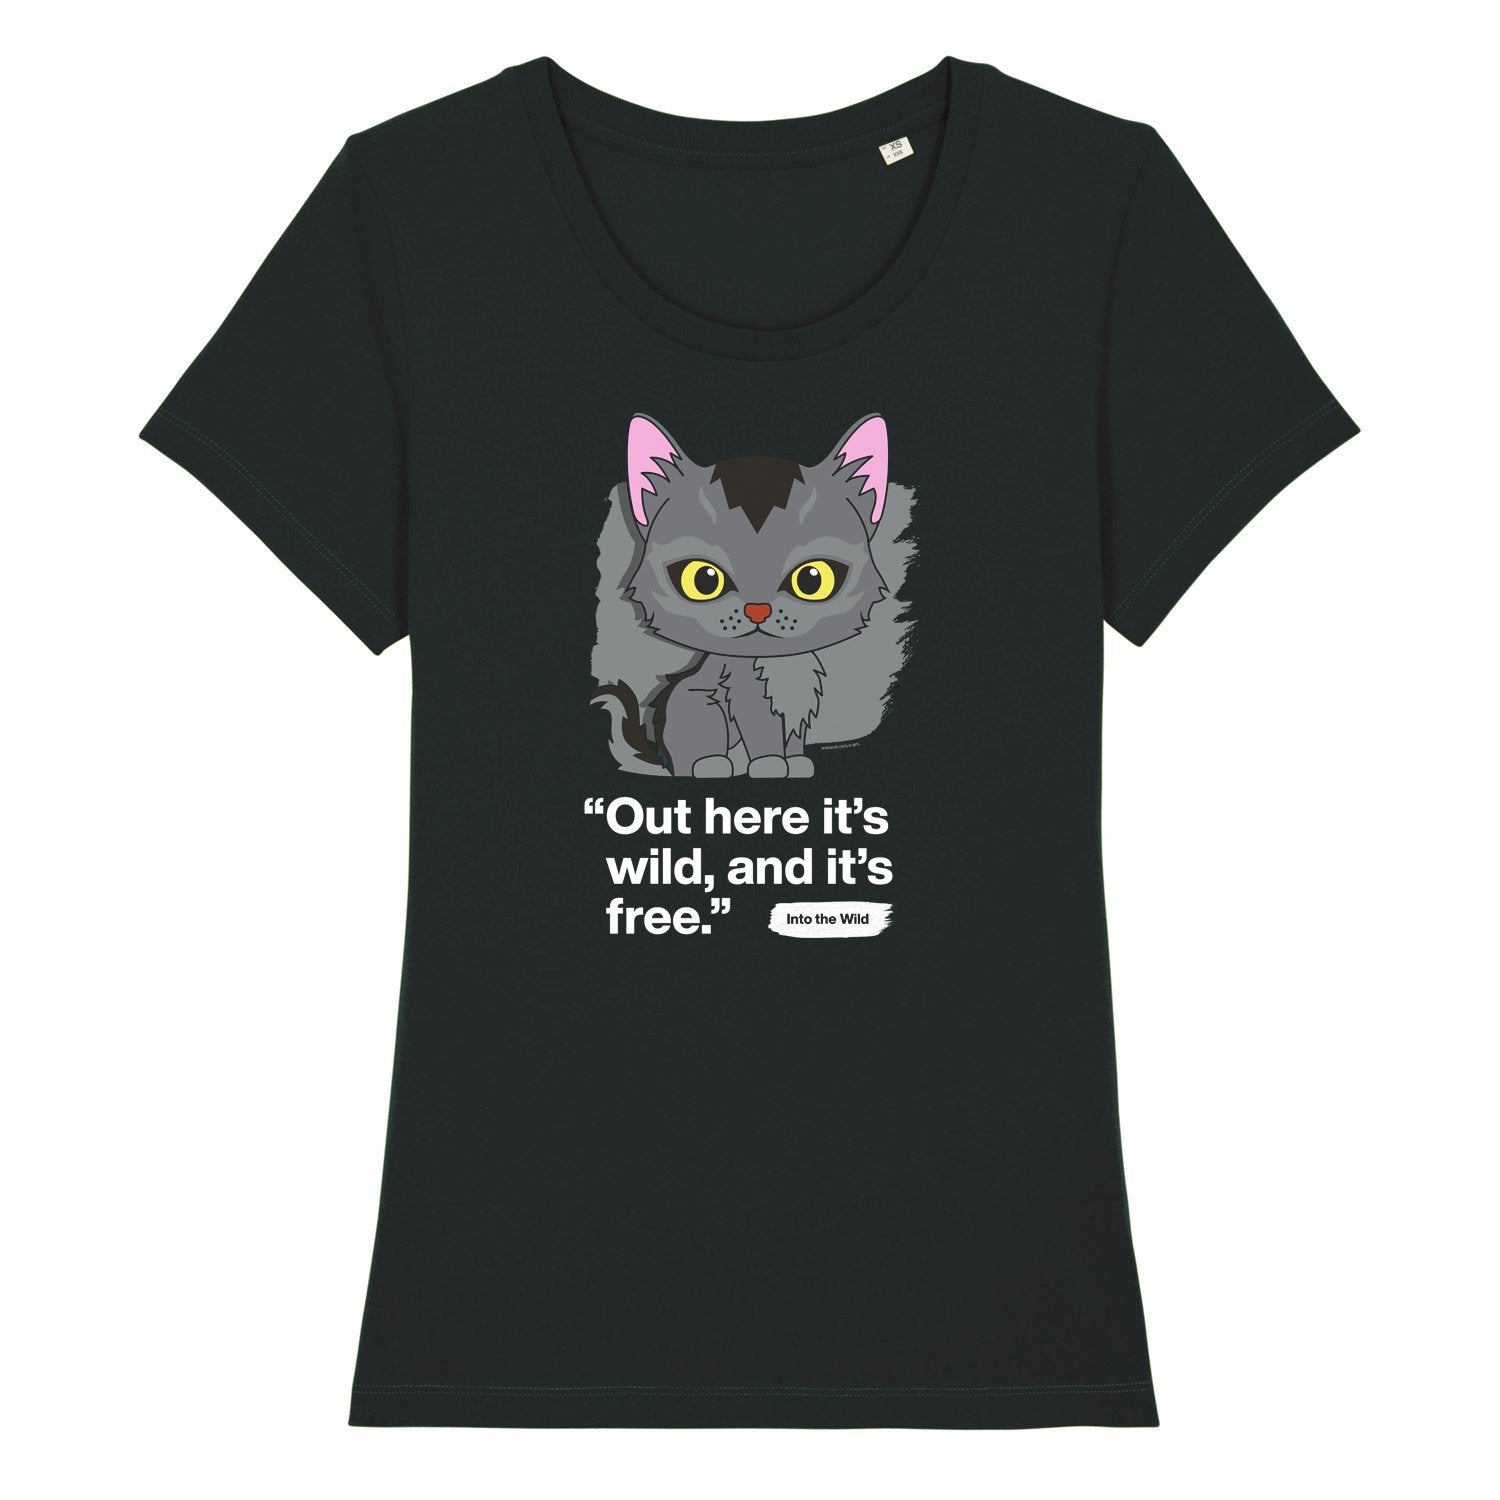 Out here it's wild - Graystripe - Adult Ladies T-Shirt